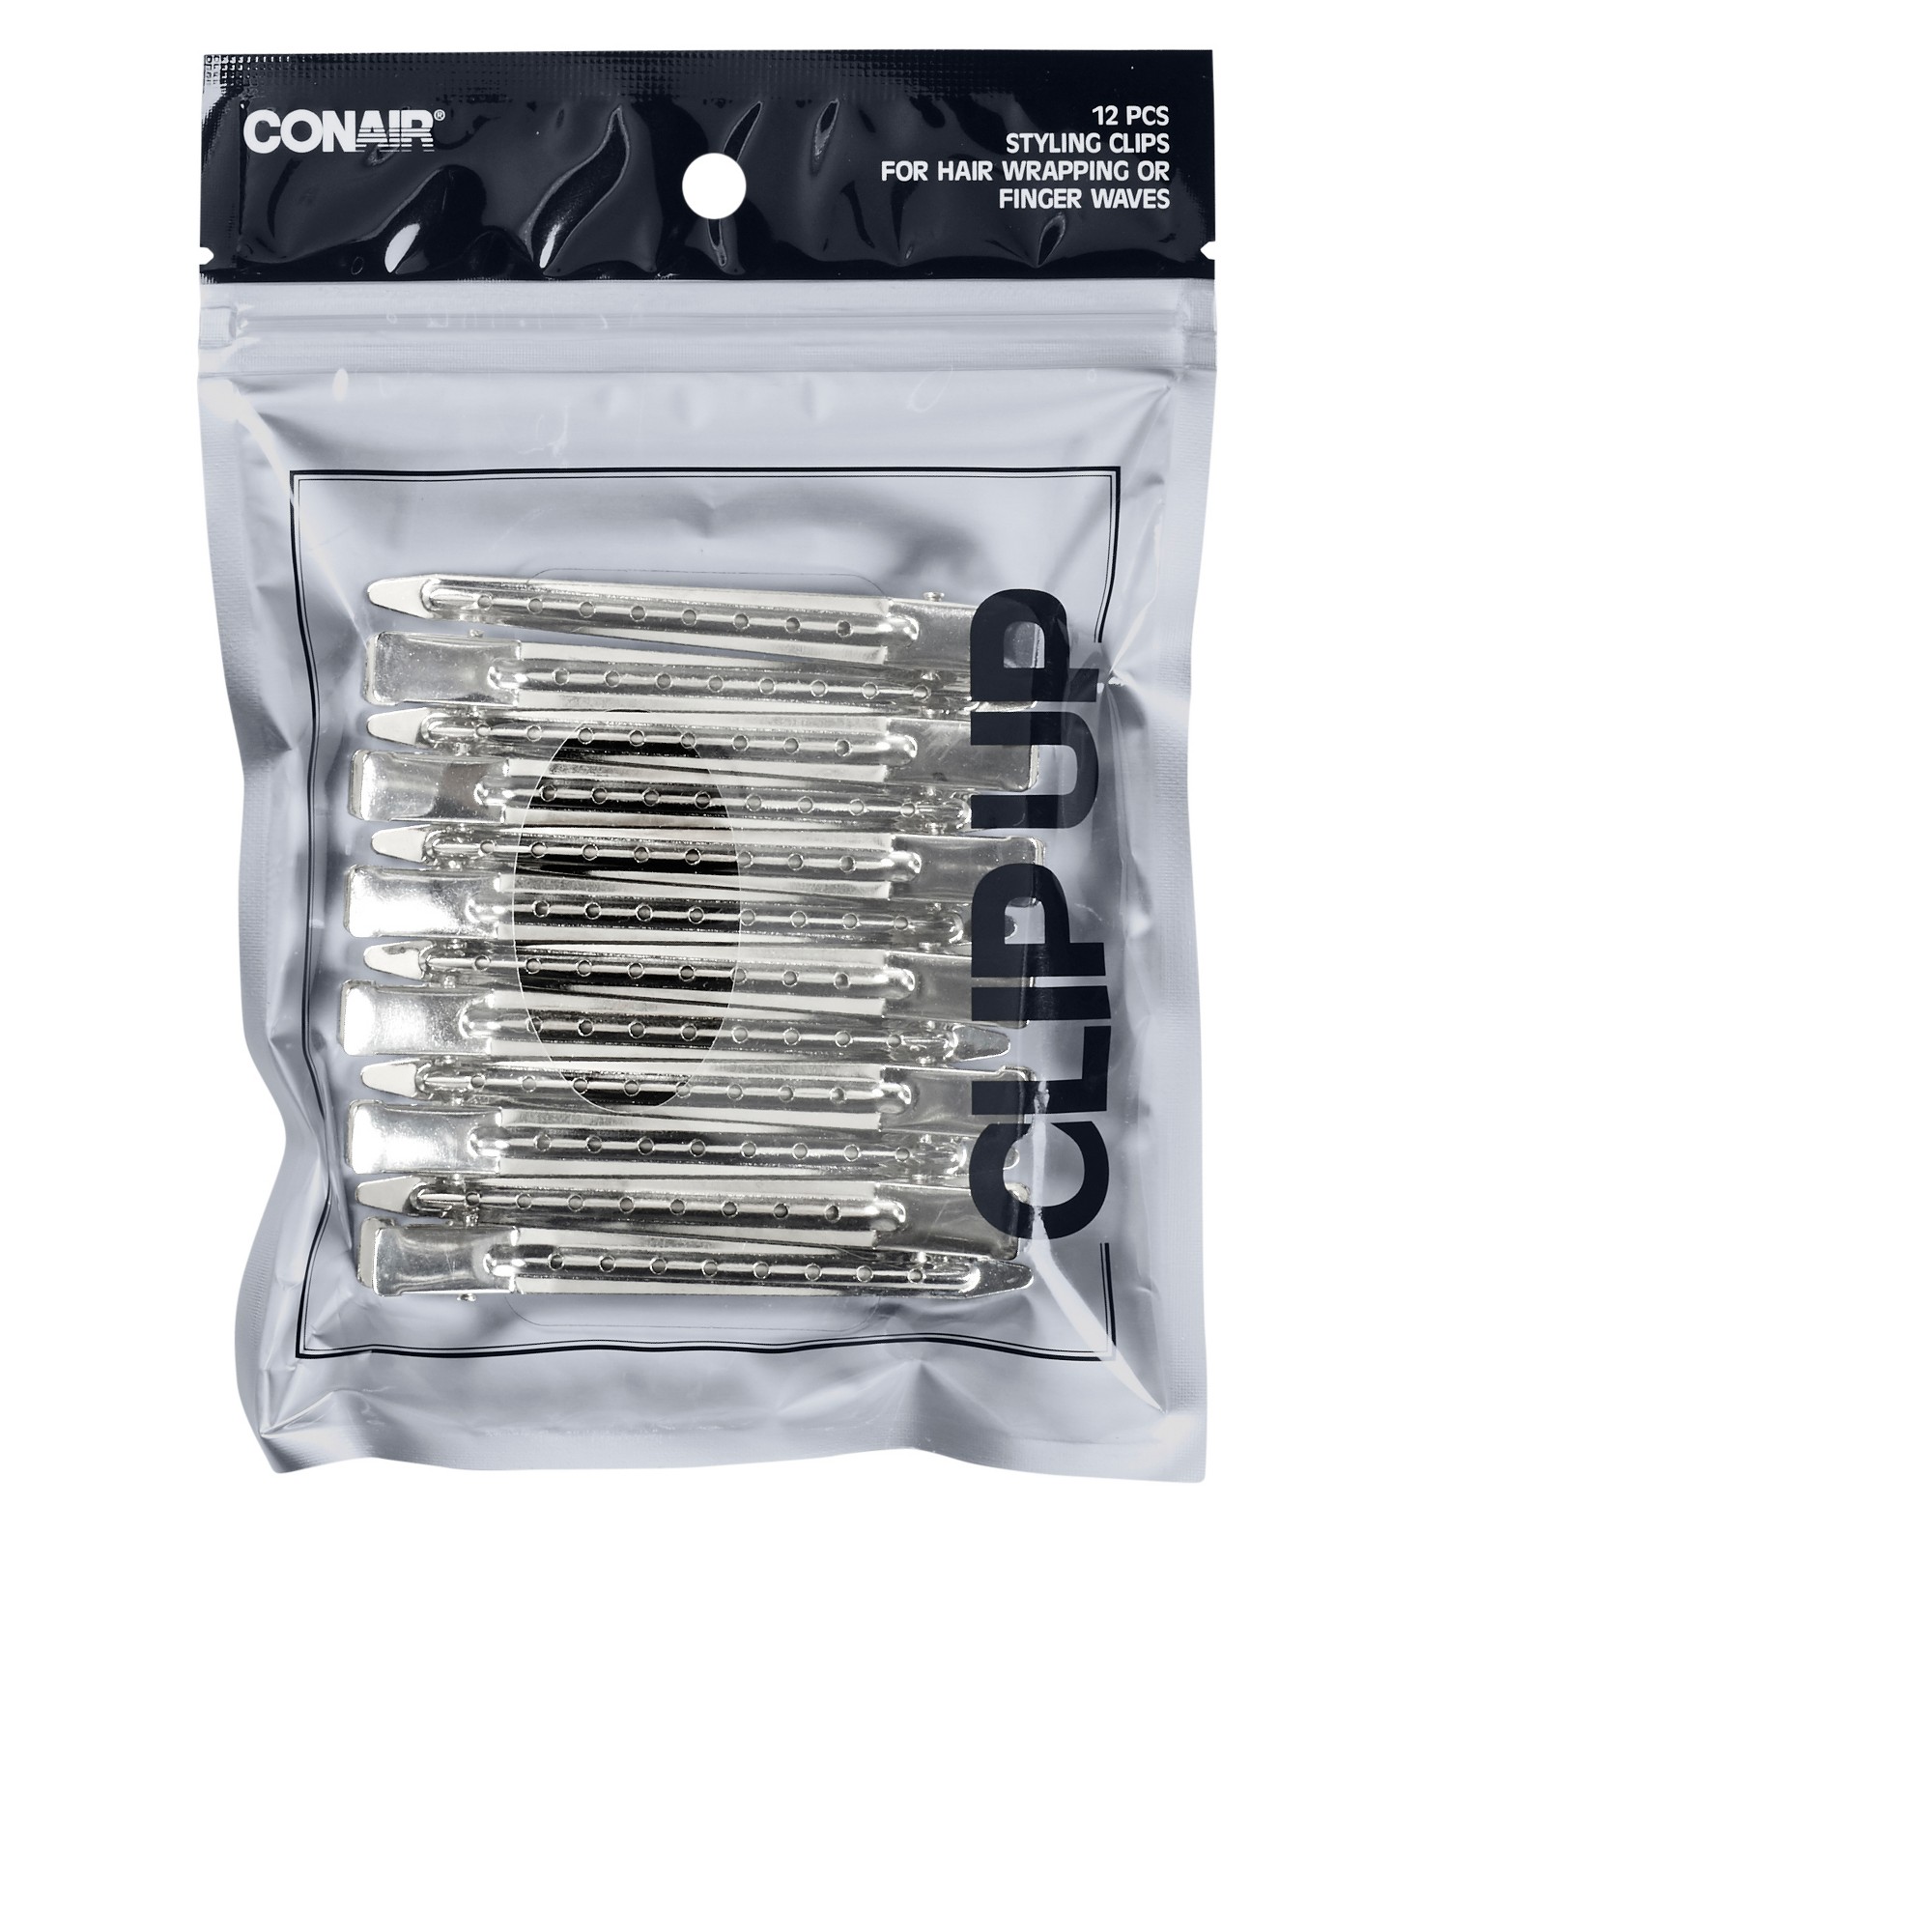 Conair Metal Styling Clips Value Pack - 12pc, Silver